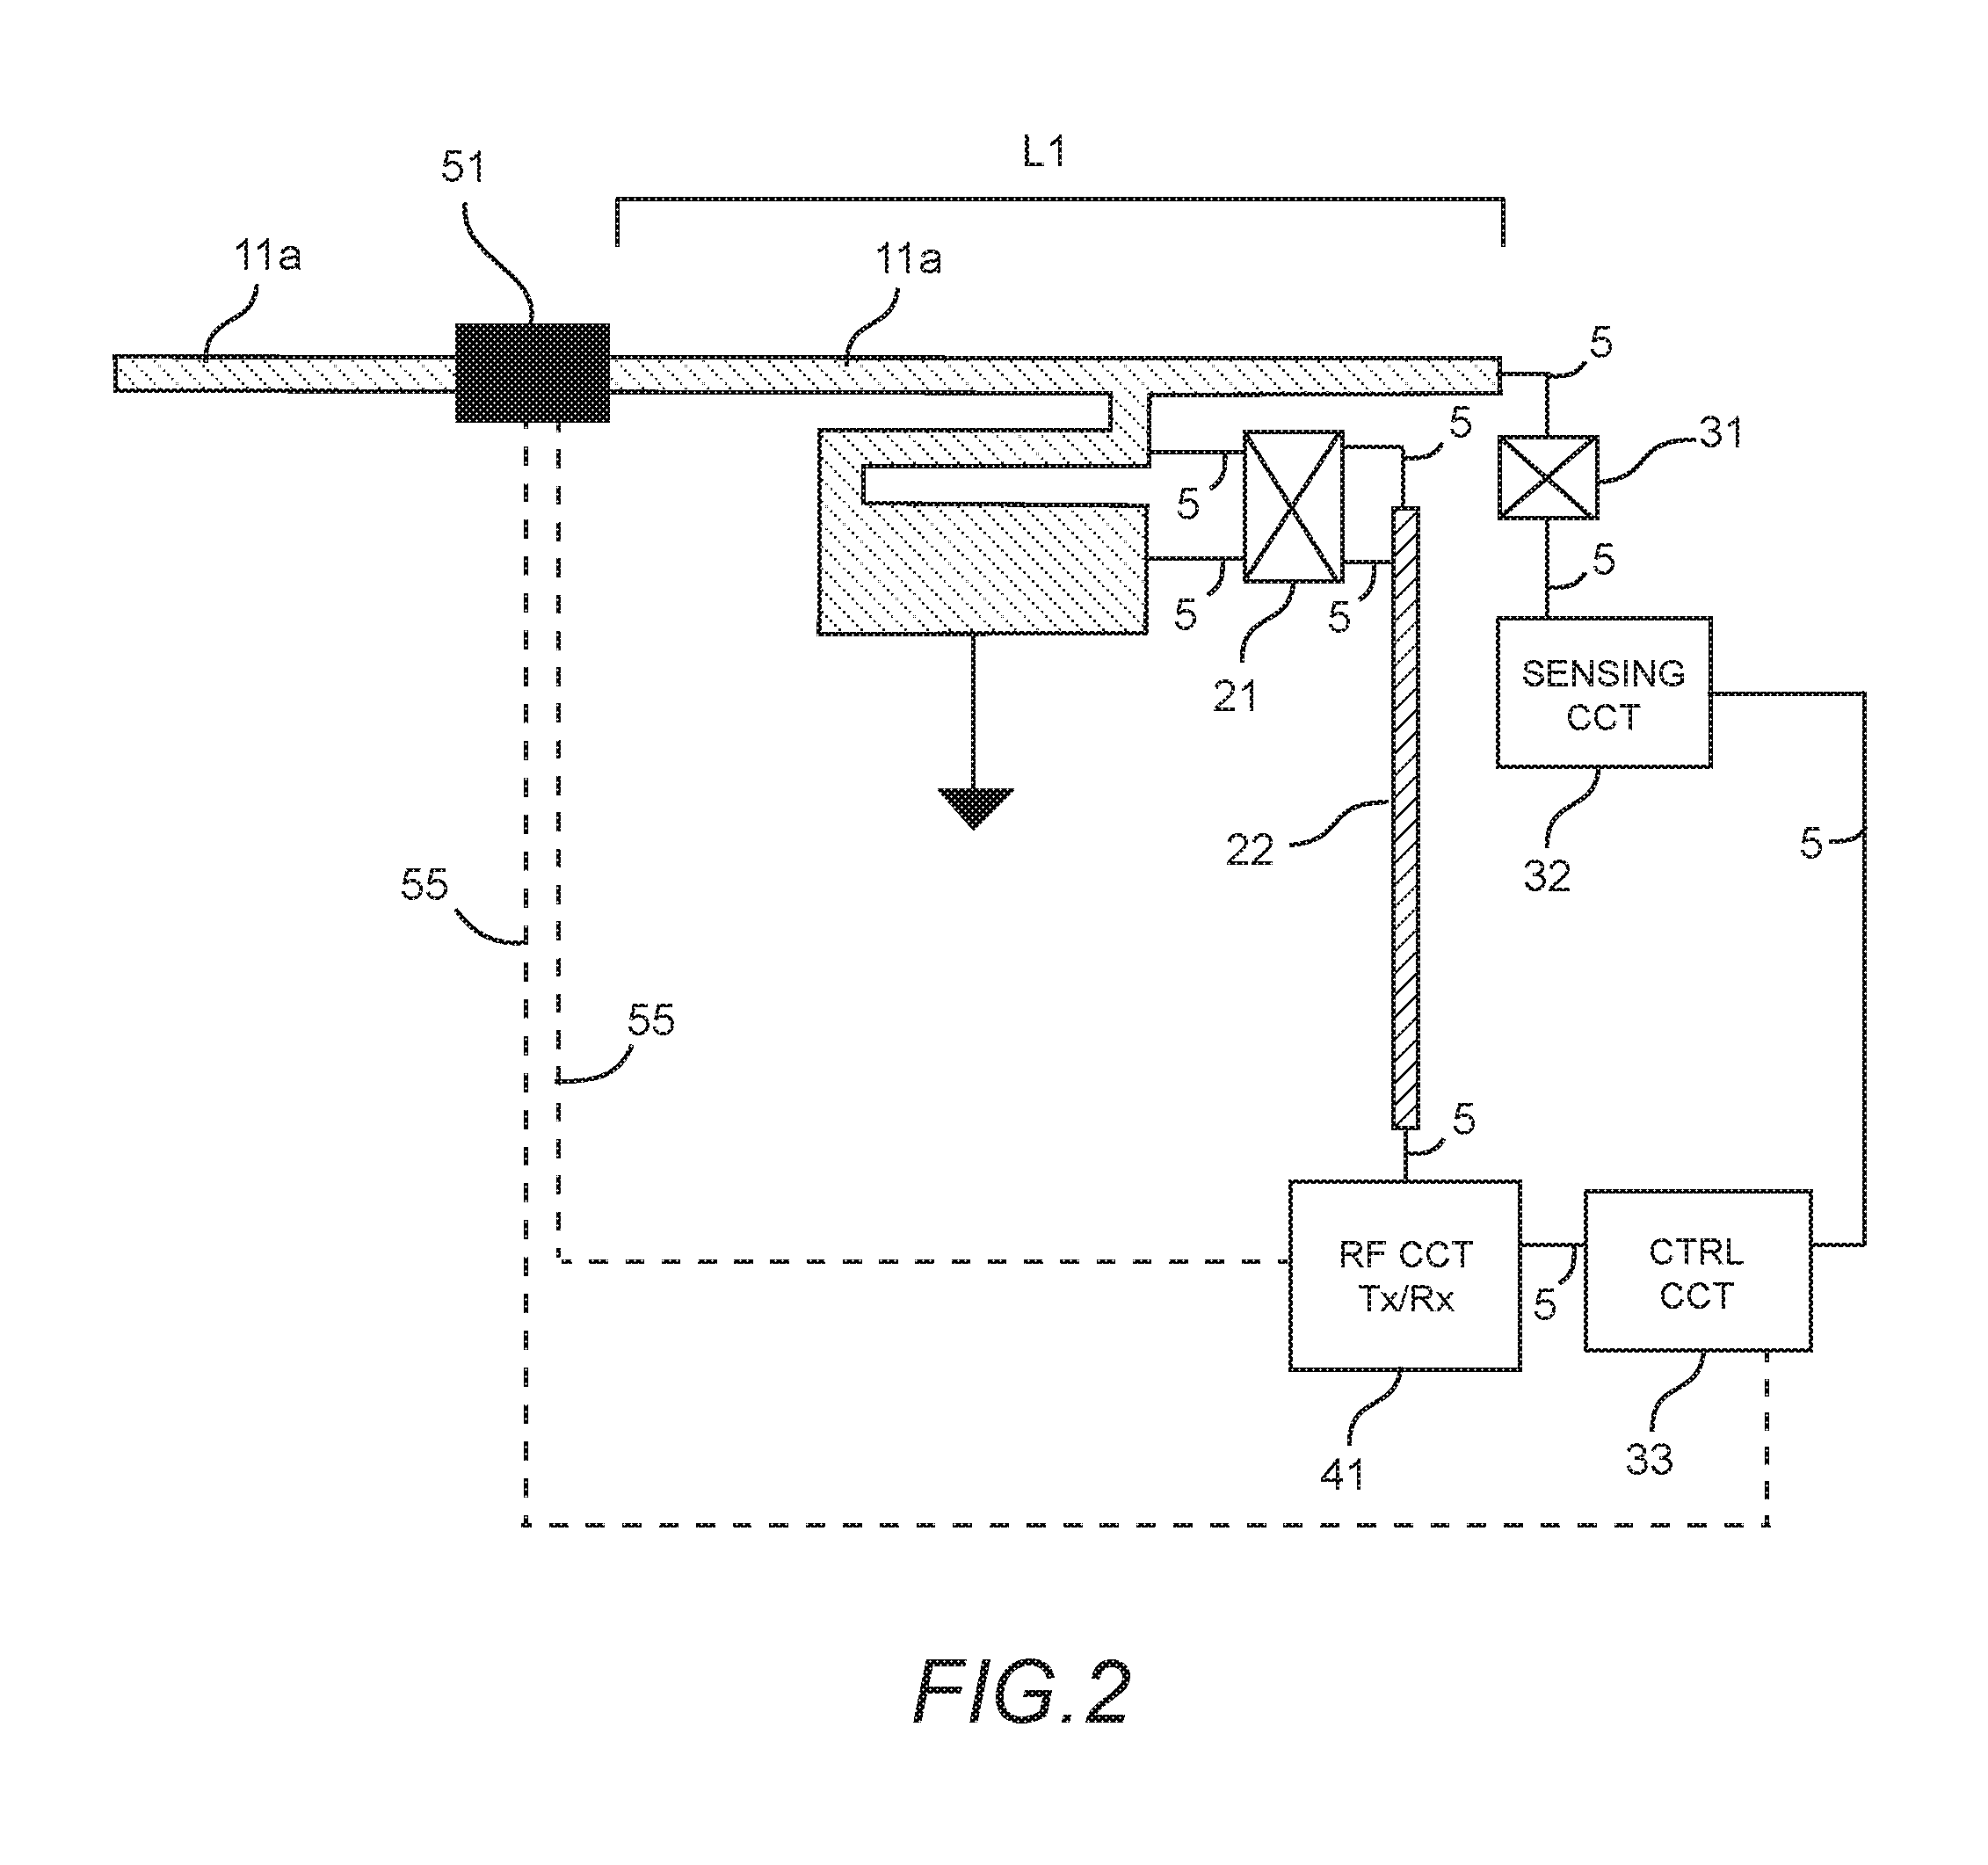 Hybrid antenna and integrated proximity sensor using a shared conductive structure